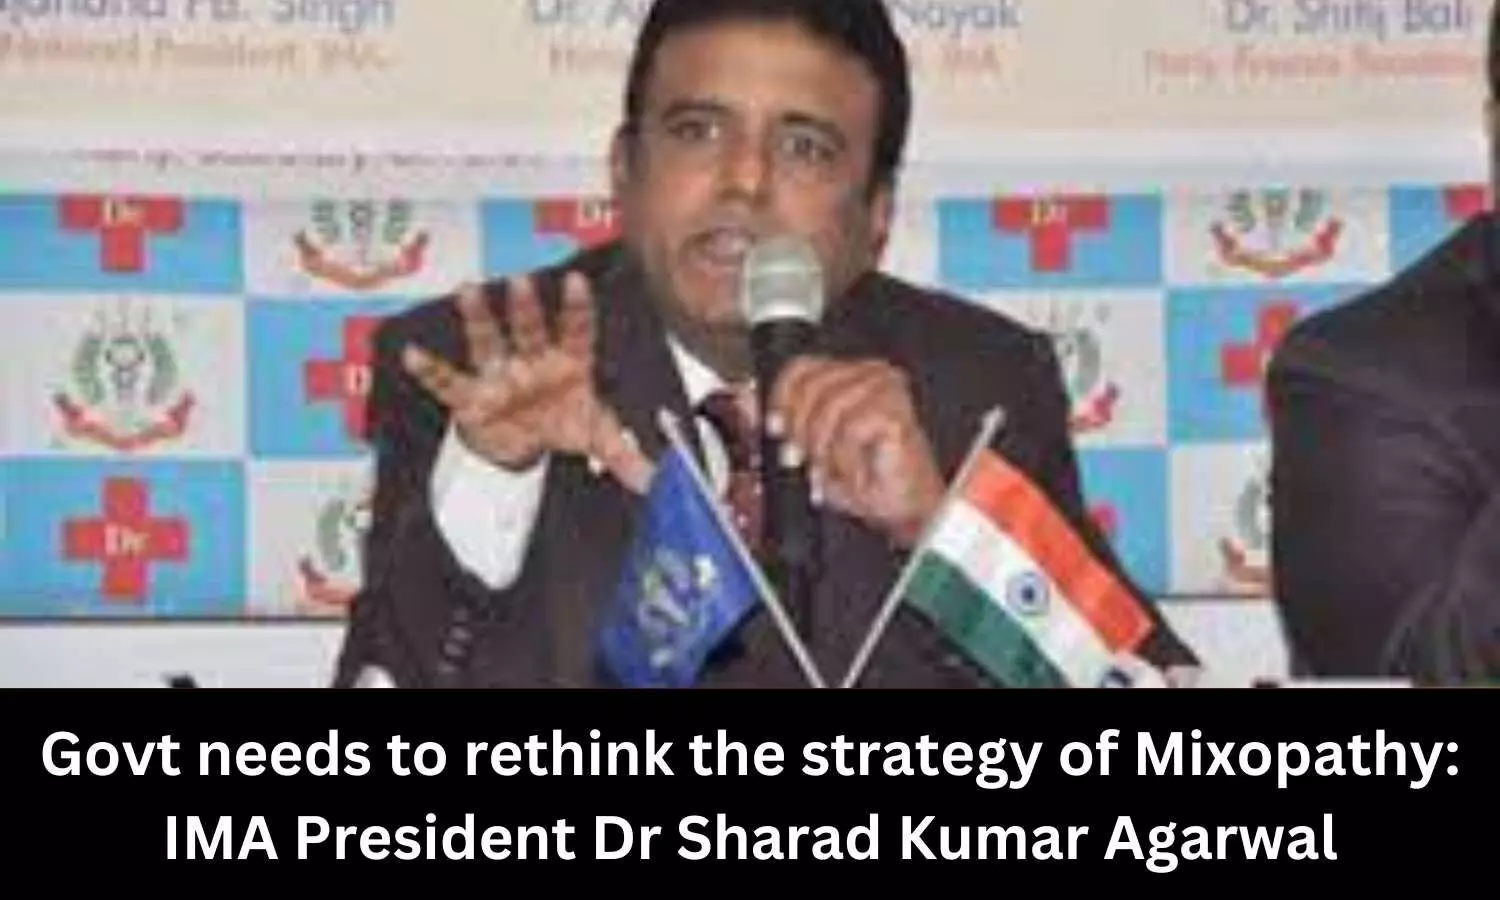 Form strategy to stop using Mixopathy: IMA President urges Govt